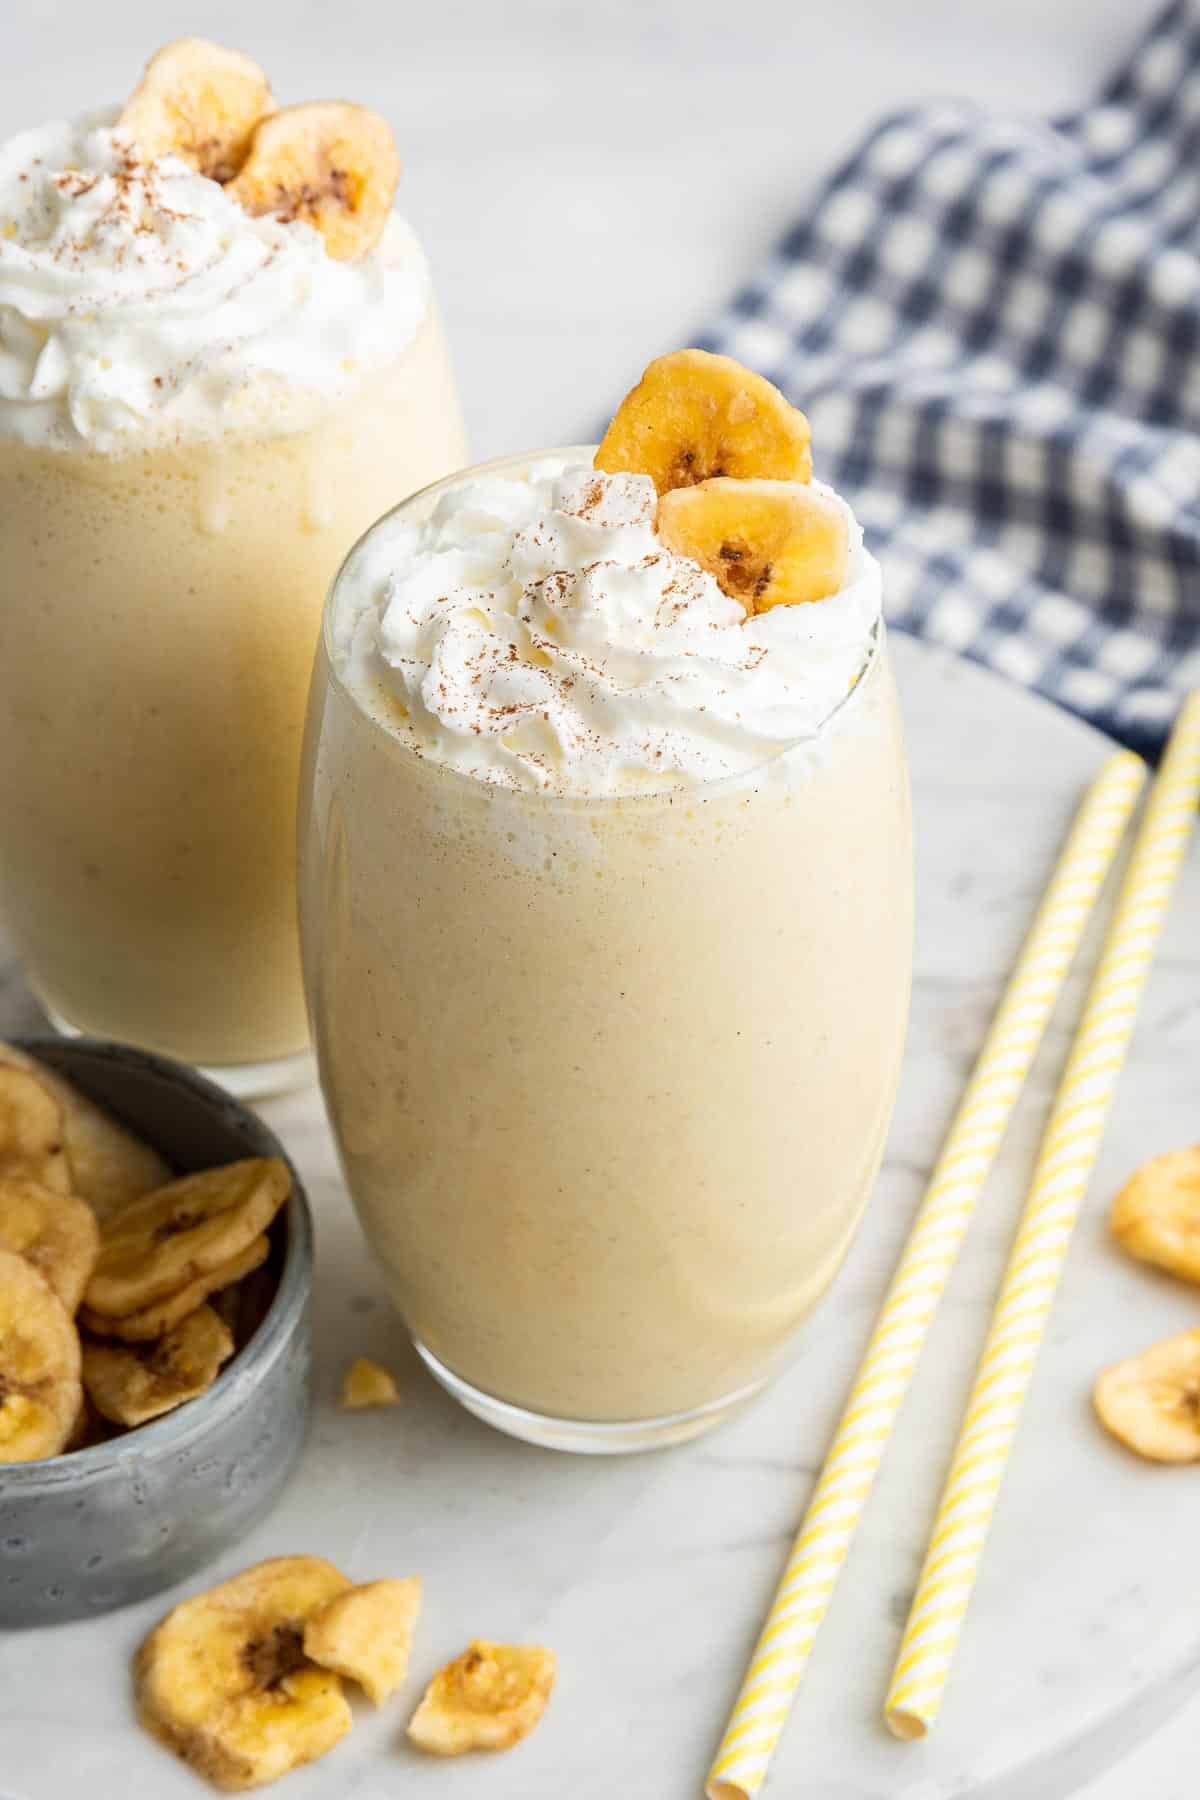 Two glasses of banana milkshake garnished with whipped cream and dried banana slices.